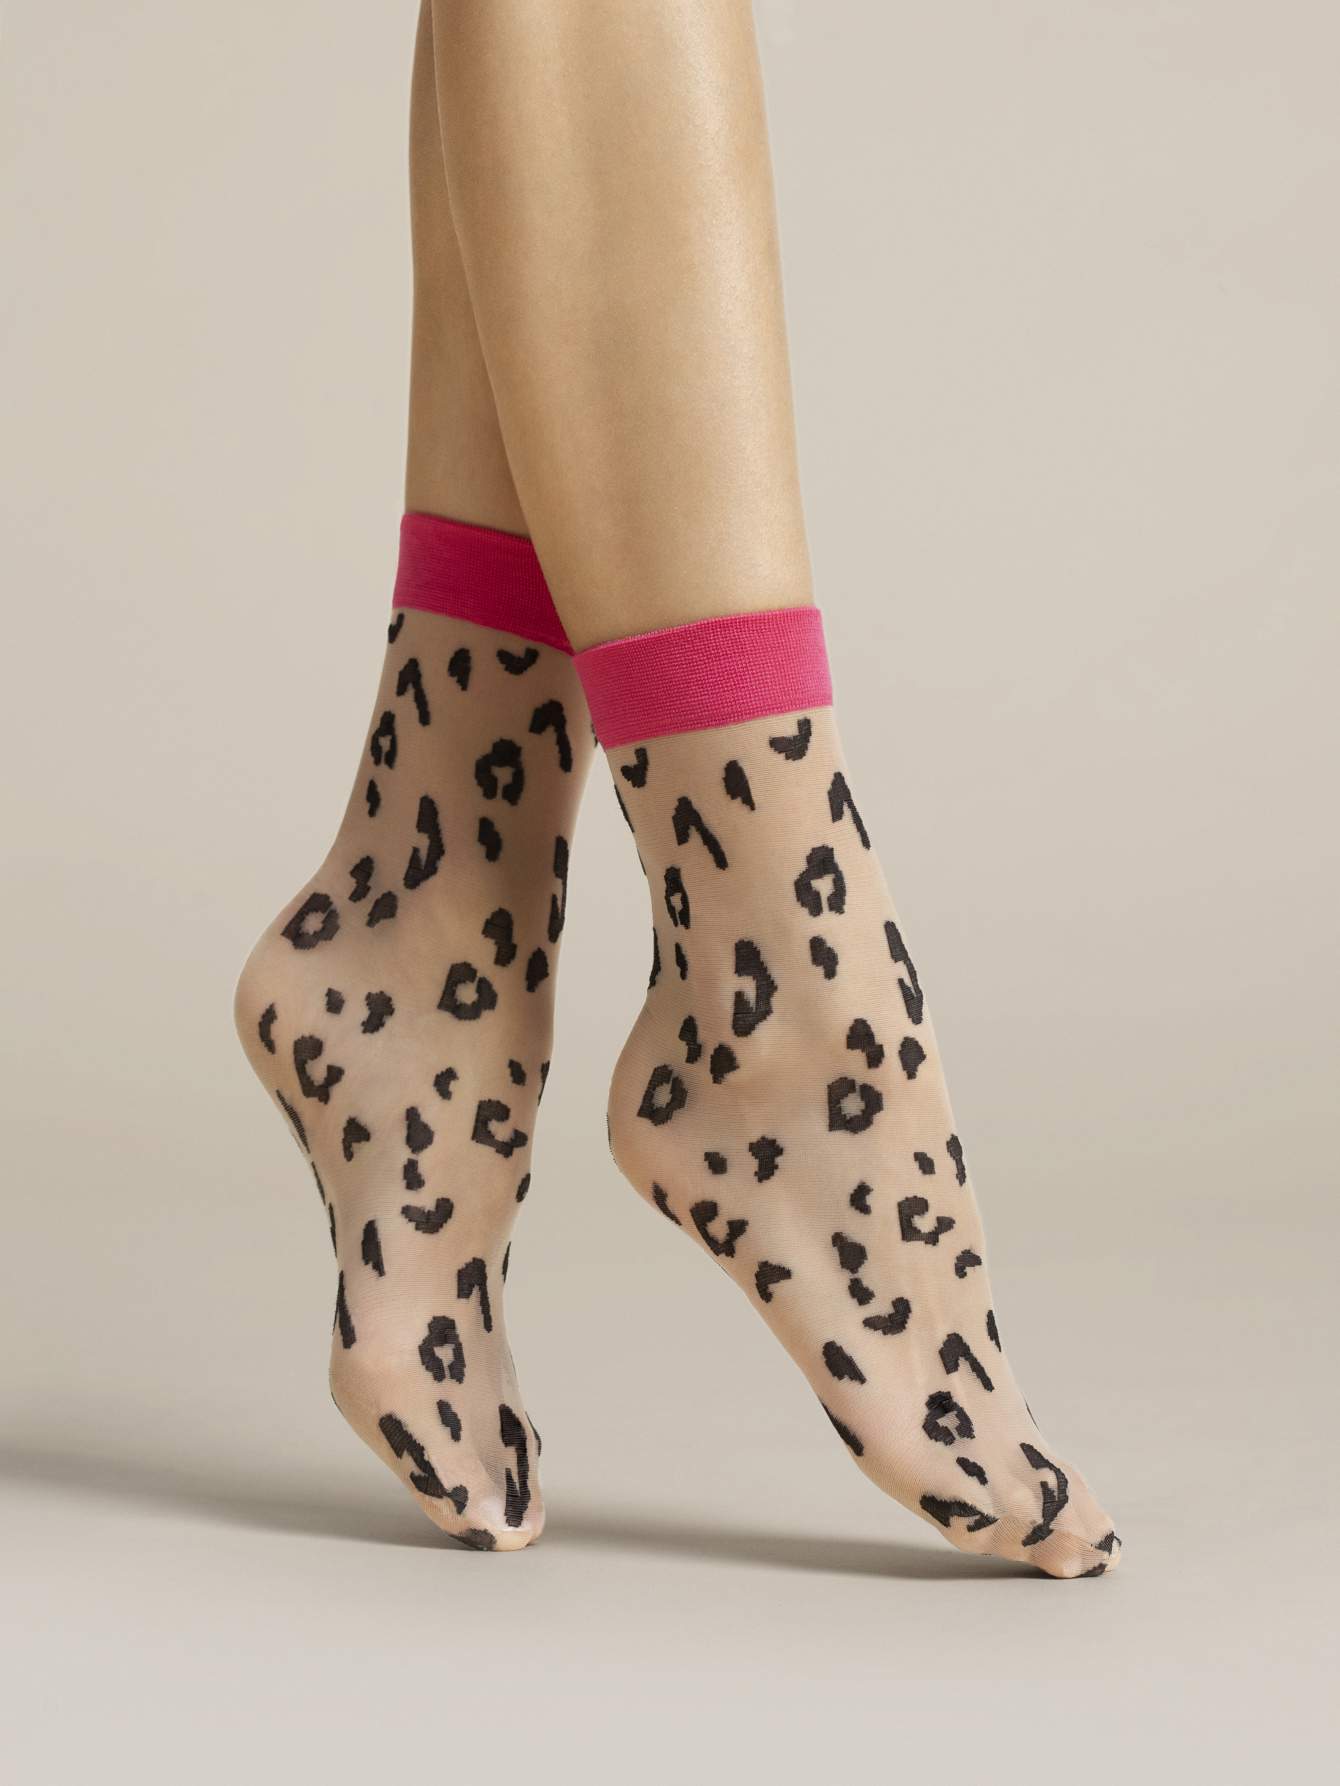 Fiore Amalia Sock - Sheer nude fashion ankle socks with a woven black leopard print pattern and pink cuff.